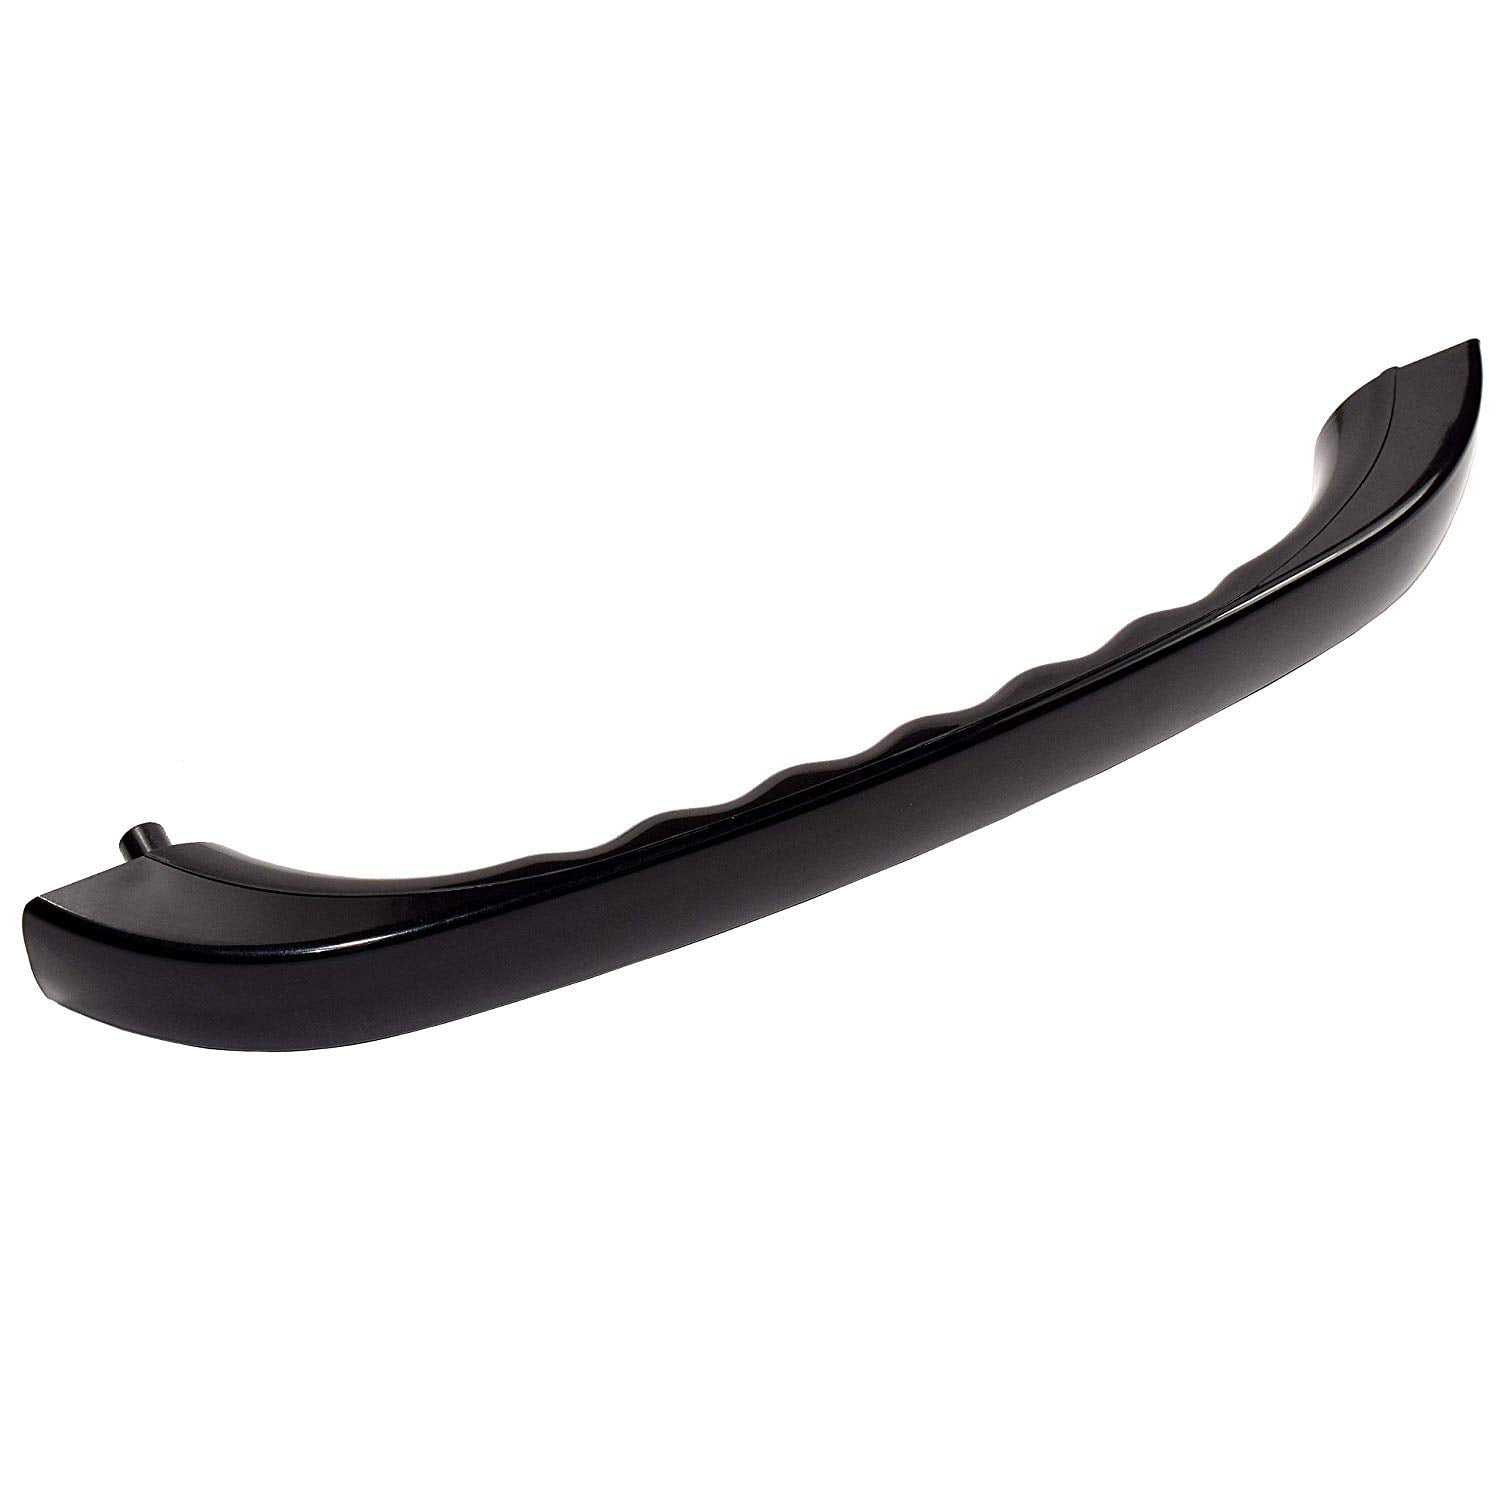 WB15X10020 WB15X334 AP2021171 HQRP Black Door Handle for GE Microwave 